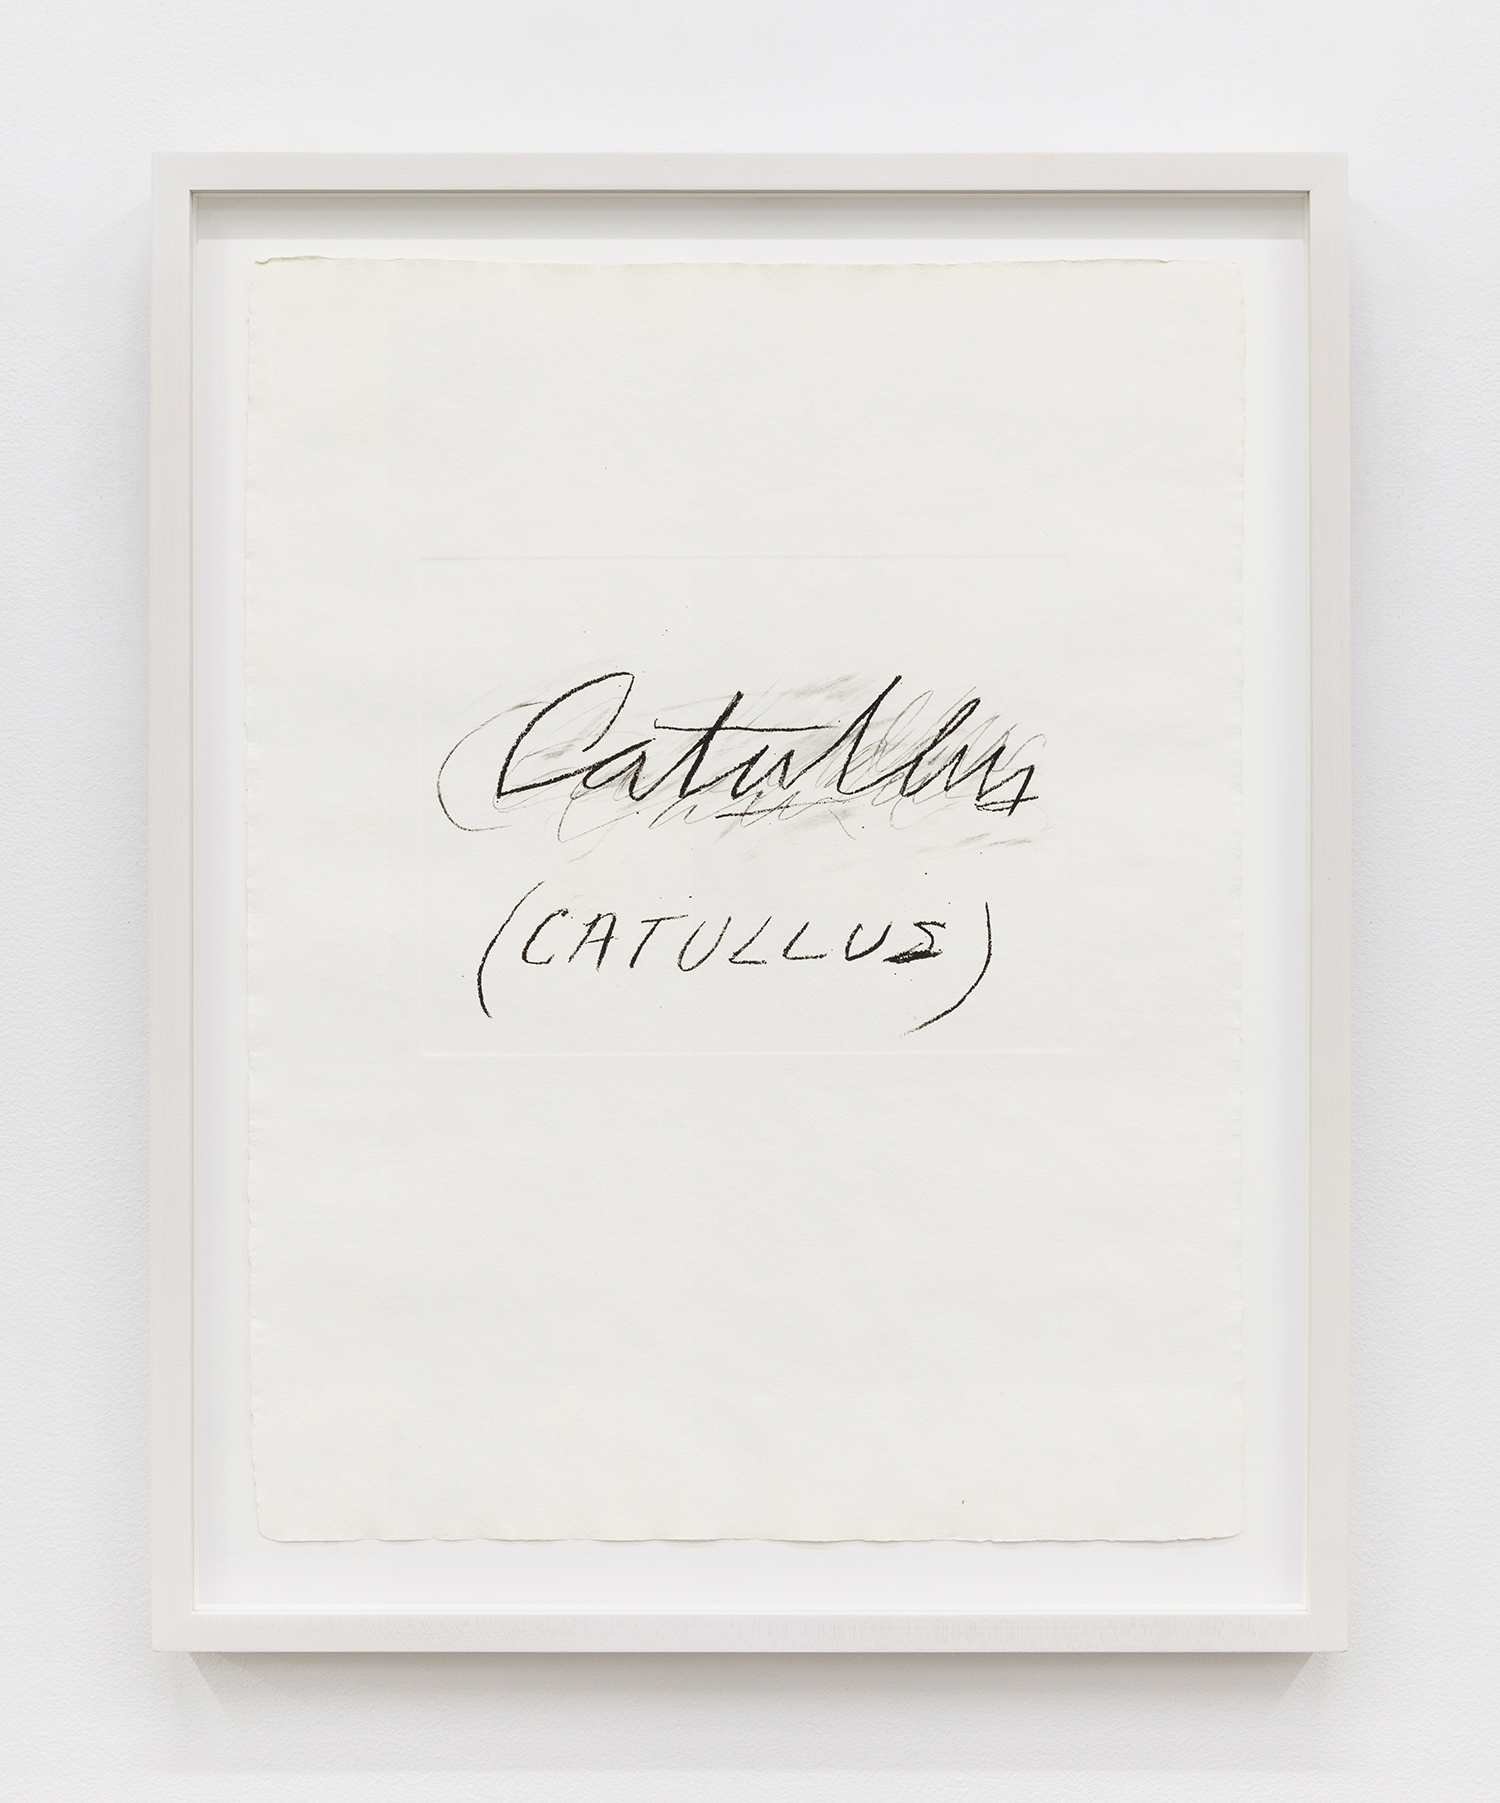 Cy Twombly Six Latin Writers and Poets, 1976 Seven lithographs printed in color with embossing Image Dimensions: 25 3/8 x 19 3/4 inches (64.5 x 50.2 cm) each Framed Dimensions: 29 1/2 x 23 1/2 inches (74.9 x 59.7 cm) each Edition of 60